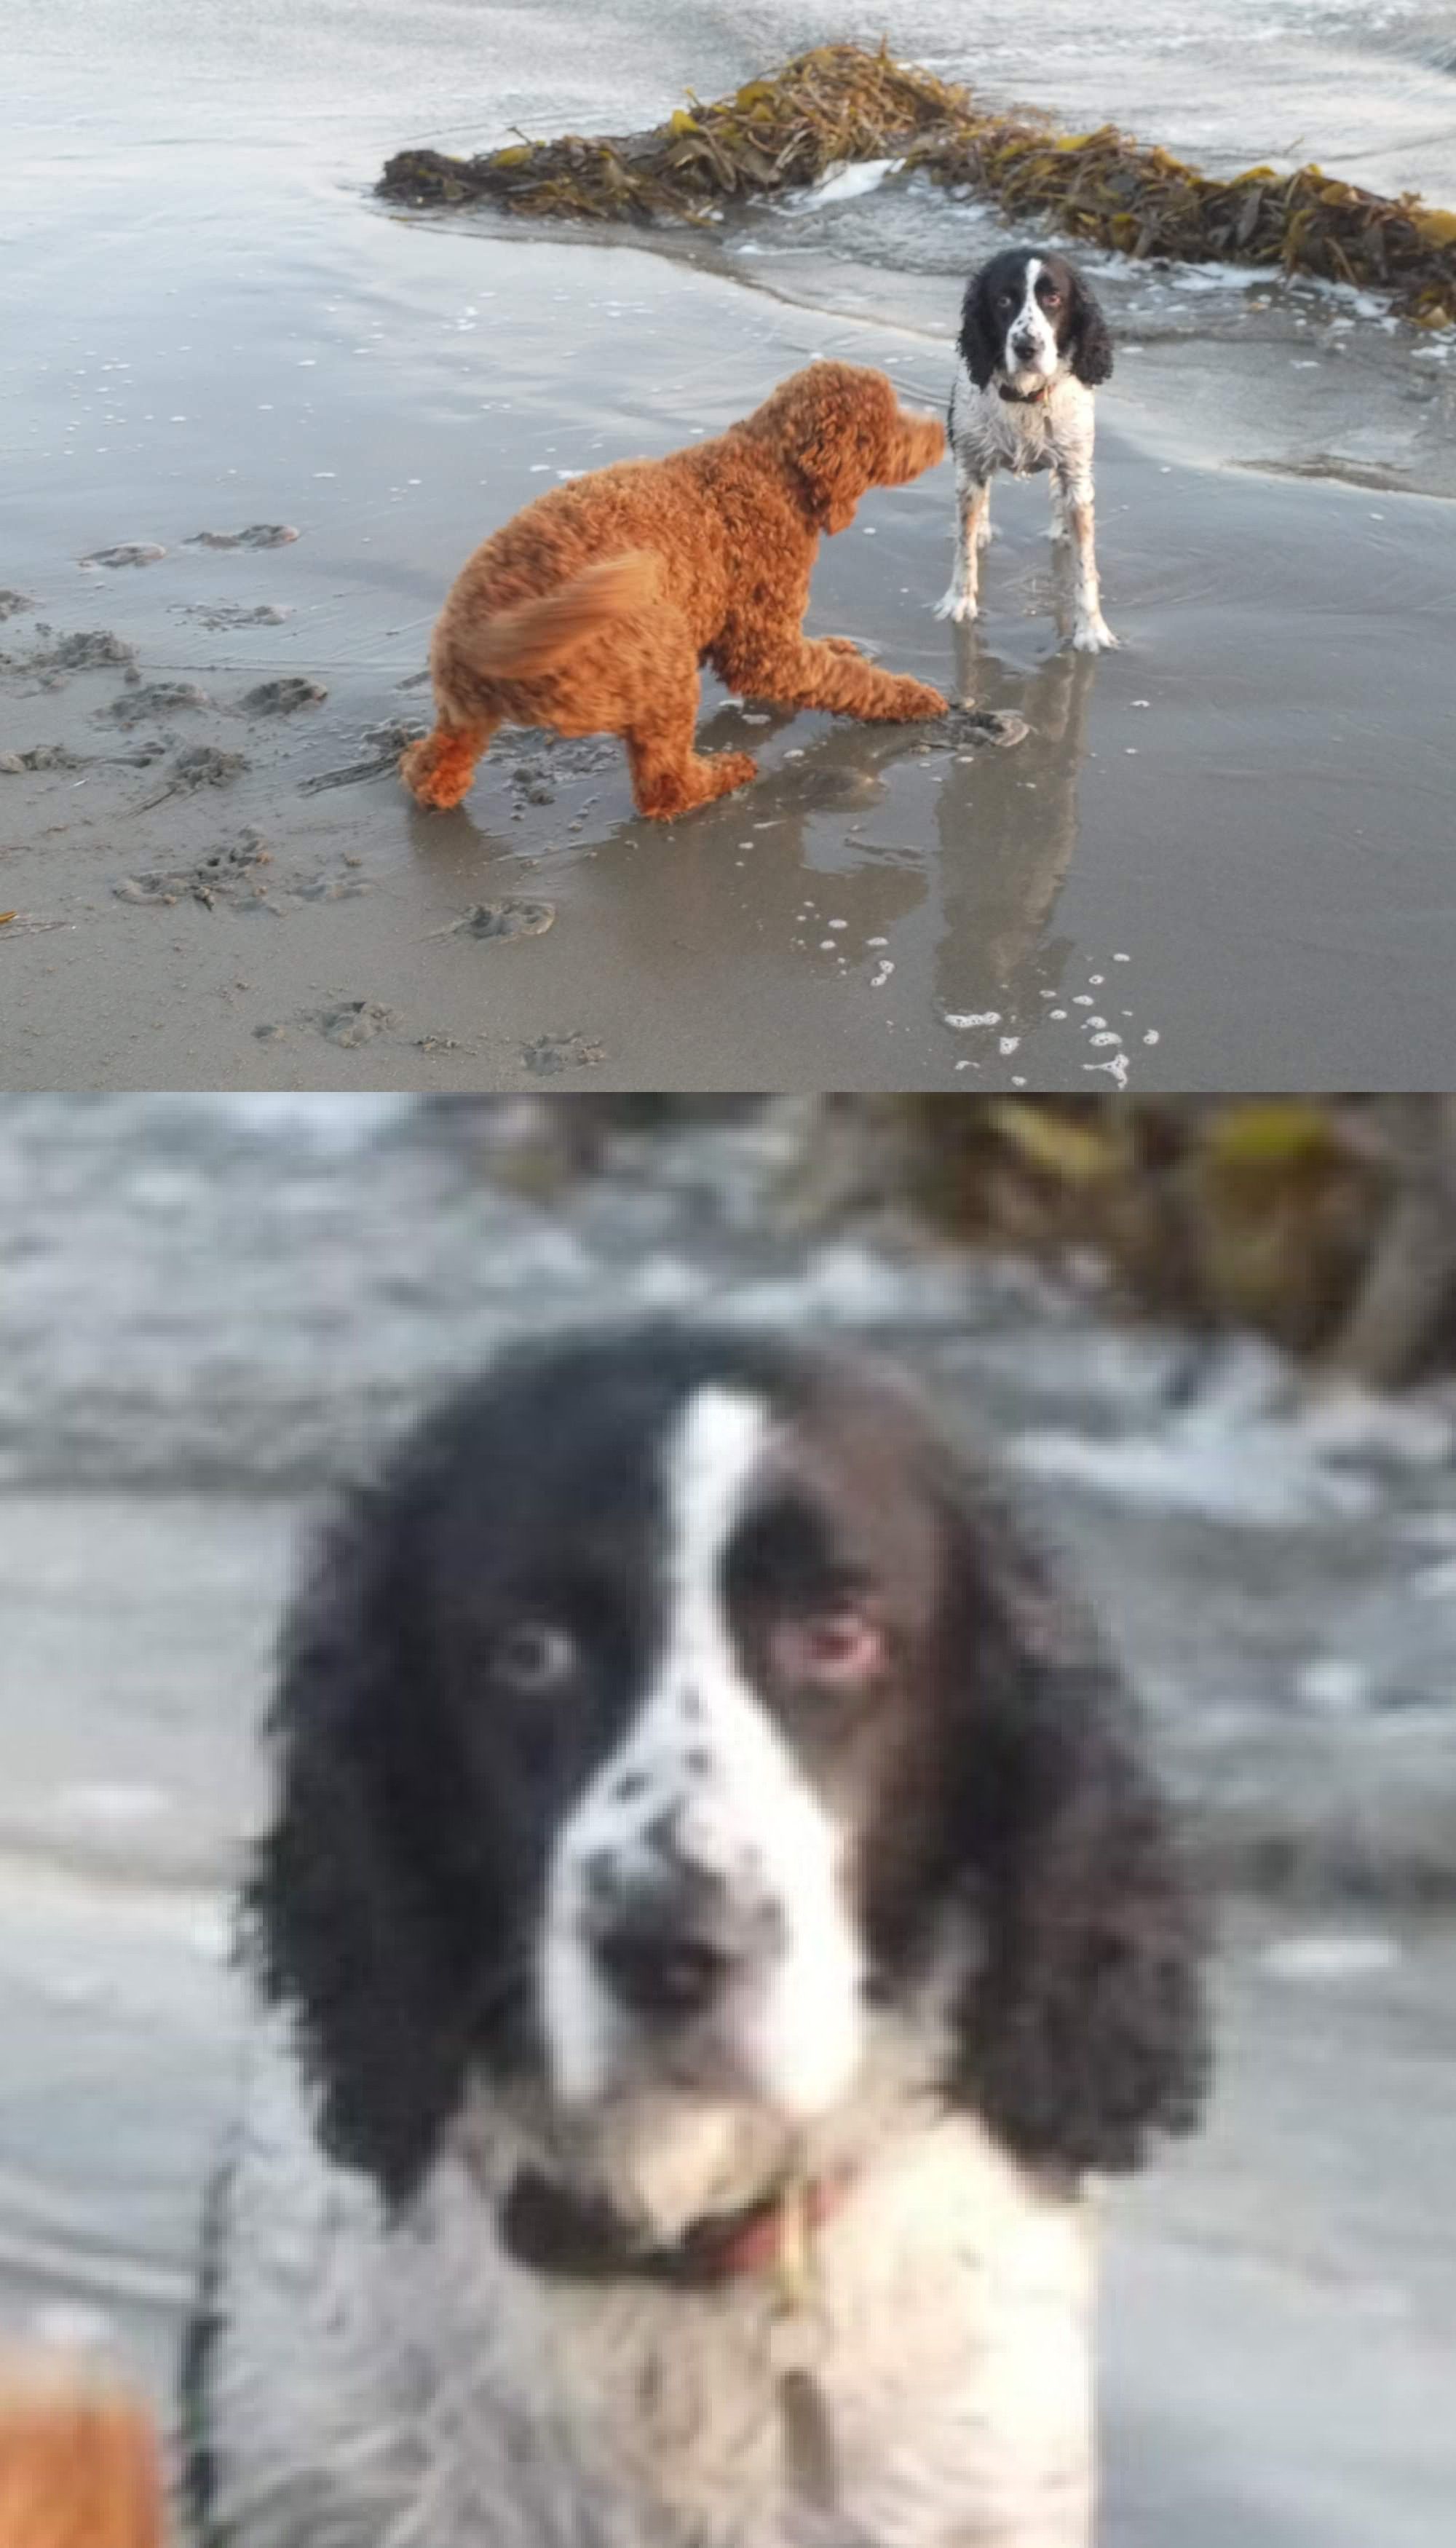 My cousin's 11 year old dog was being bothered by a puppy on the beach.